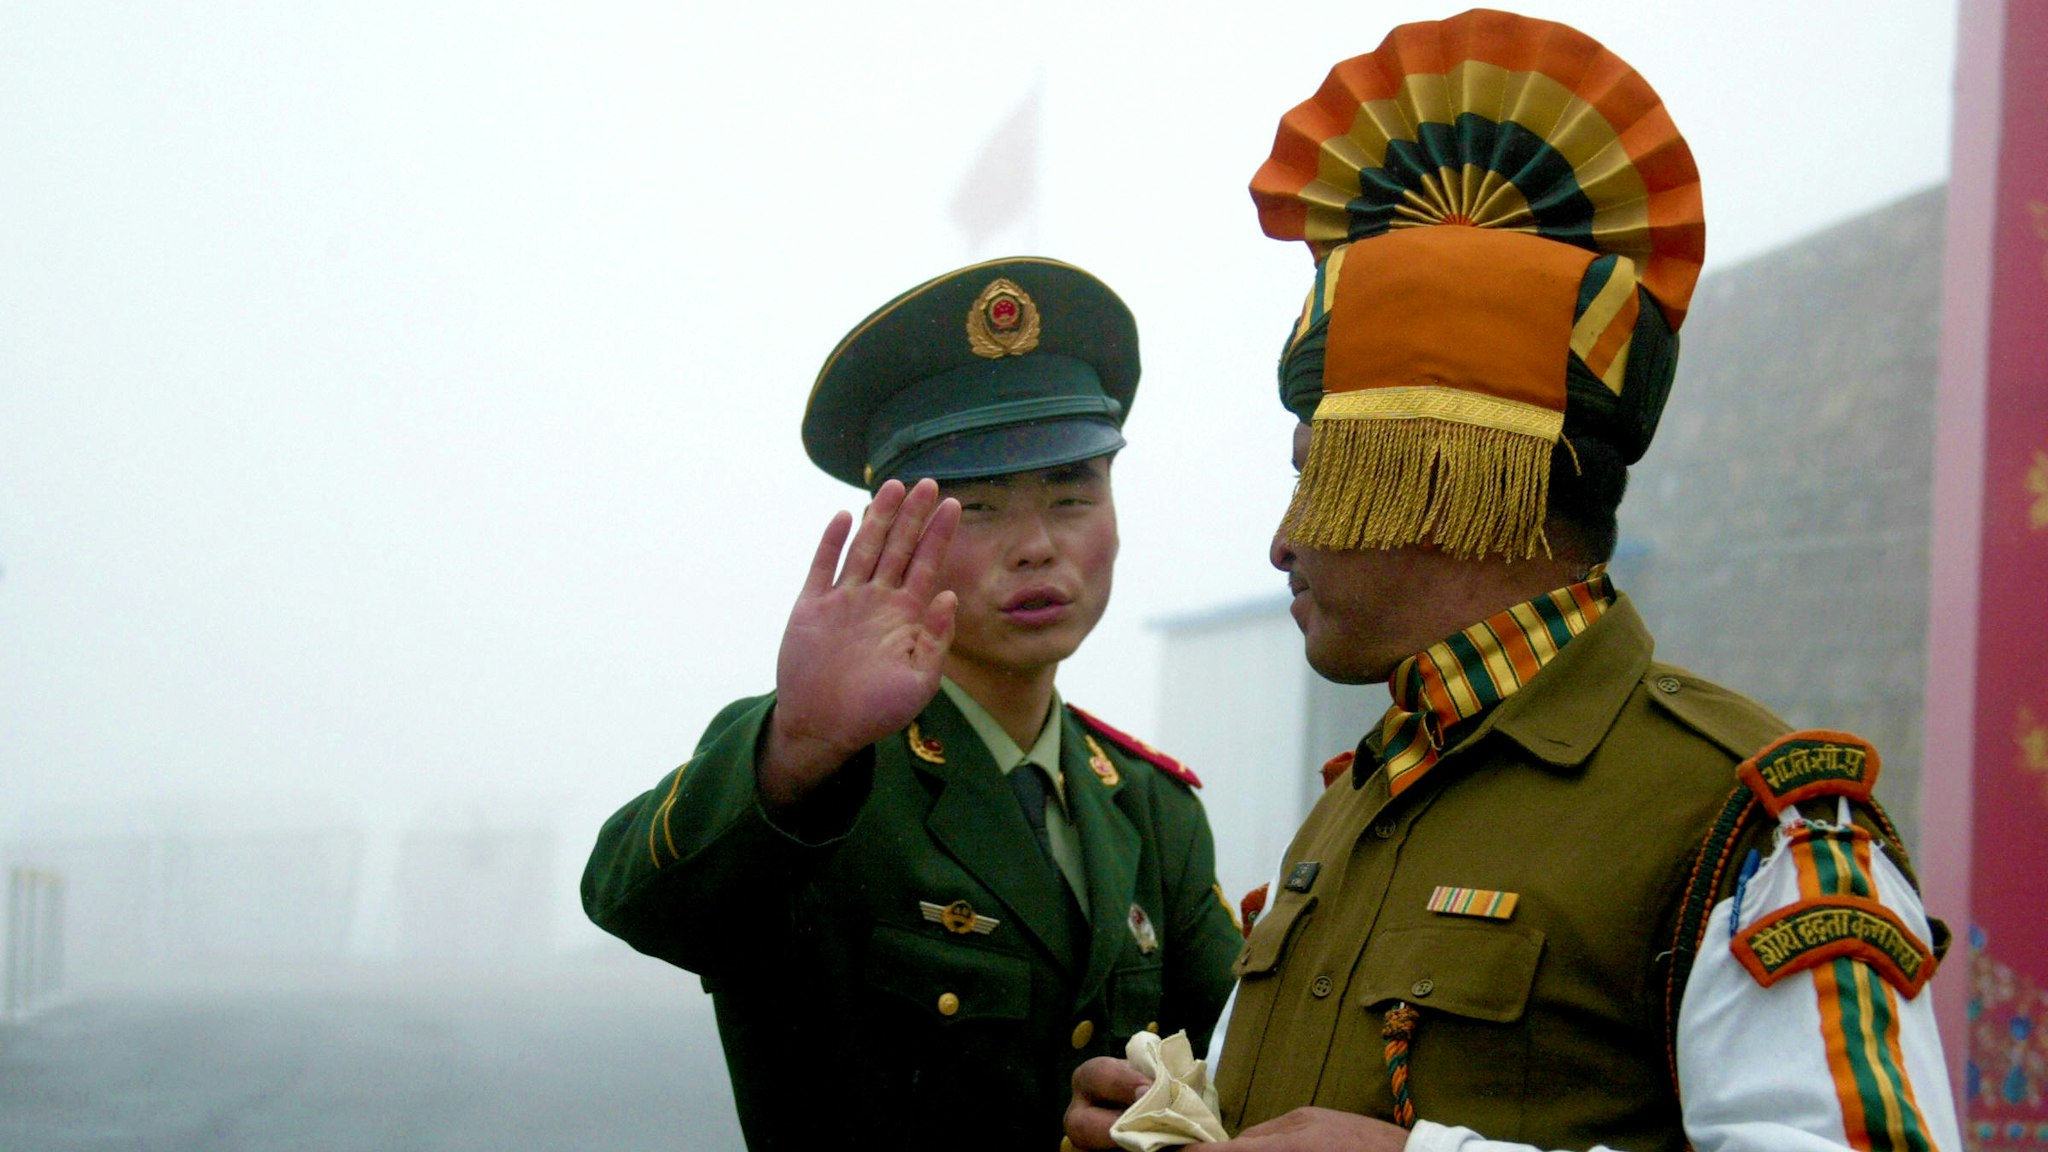 In this photograph taken on July 10, 2008, A Chinese soldier gestures as he stands near an Indian soldier on the Chinese side of the ancient Nathu La border crossing between India and China. When the two Asian giants opened the 4,500-metre-high (15,000 feet) pass in 2006 to improve ties dogged by a bitter war in 1962 that saw the route closed for 44 years, many on both sides hoped it would boost trade. Two years on, optimism has given way to despair as the flow of traders has shrunk to a trickle because of red tape, poor facilities and sub-standard roads in India's remote northeastern mountainous state of Sikkim.